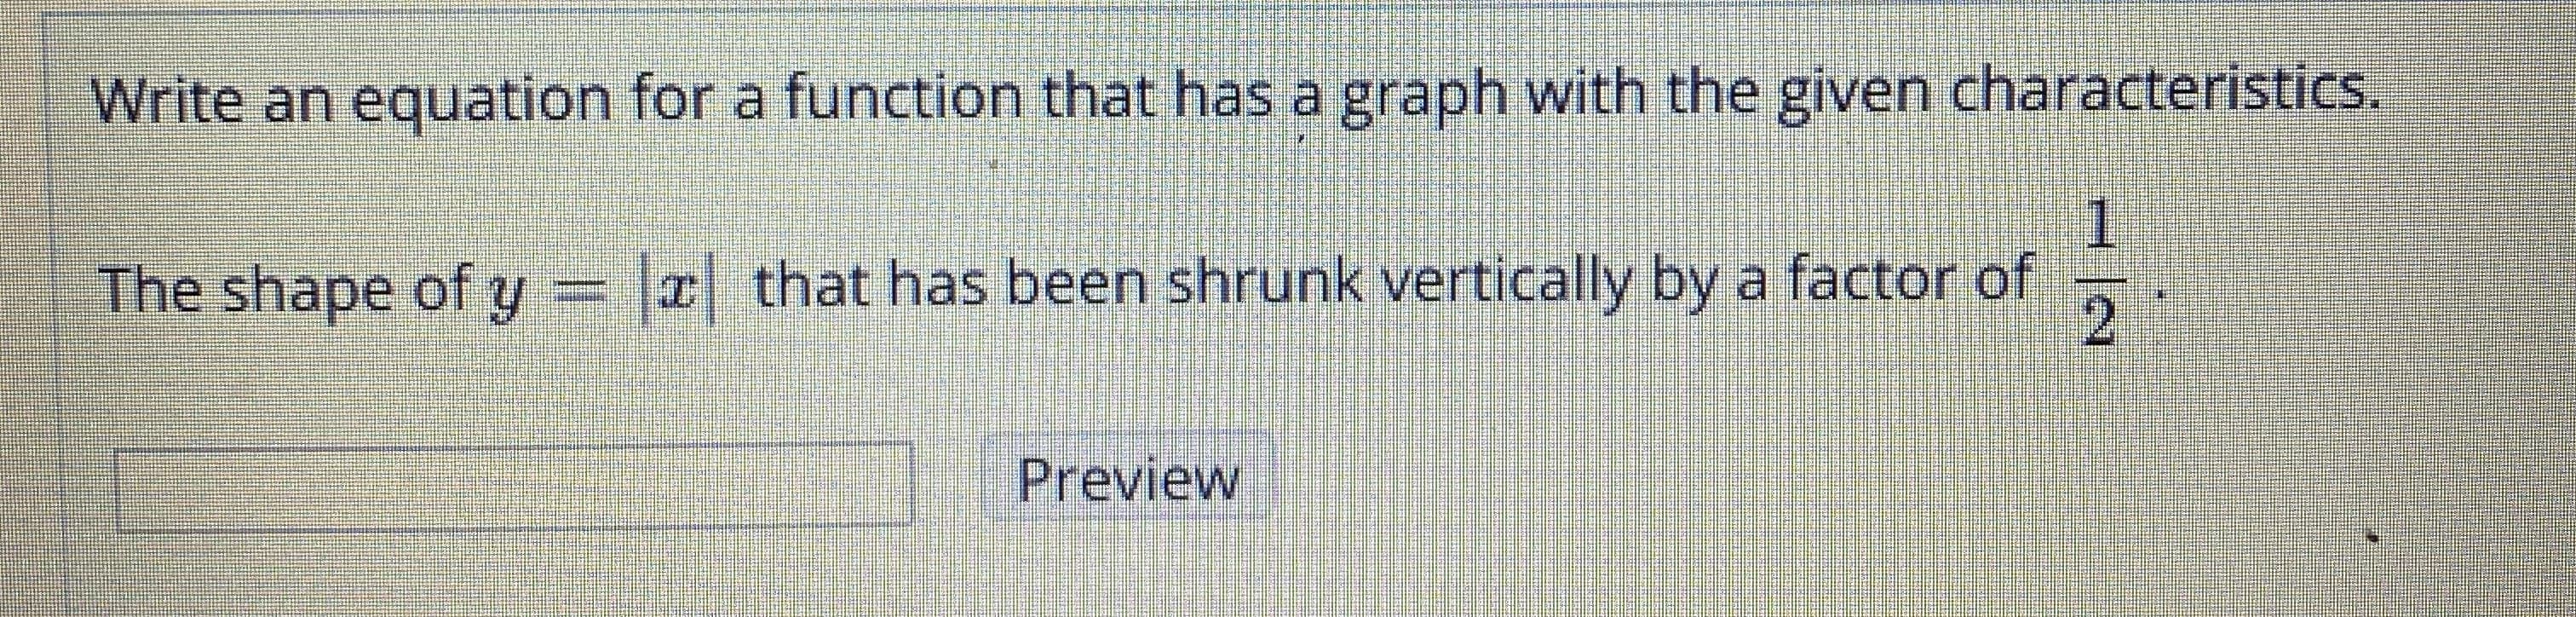 Write an equation for a function that has a graph with the given characteristics.
1
The shape of y = x that has been shrunk vertically by a factor of
Preview
